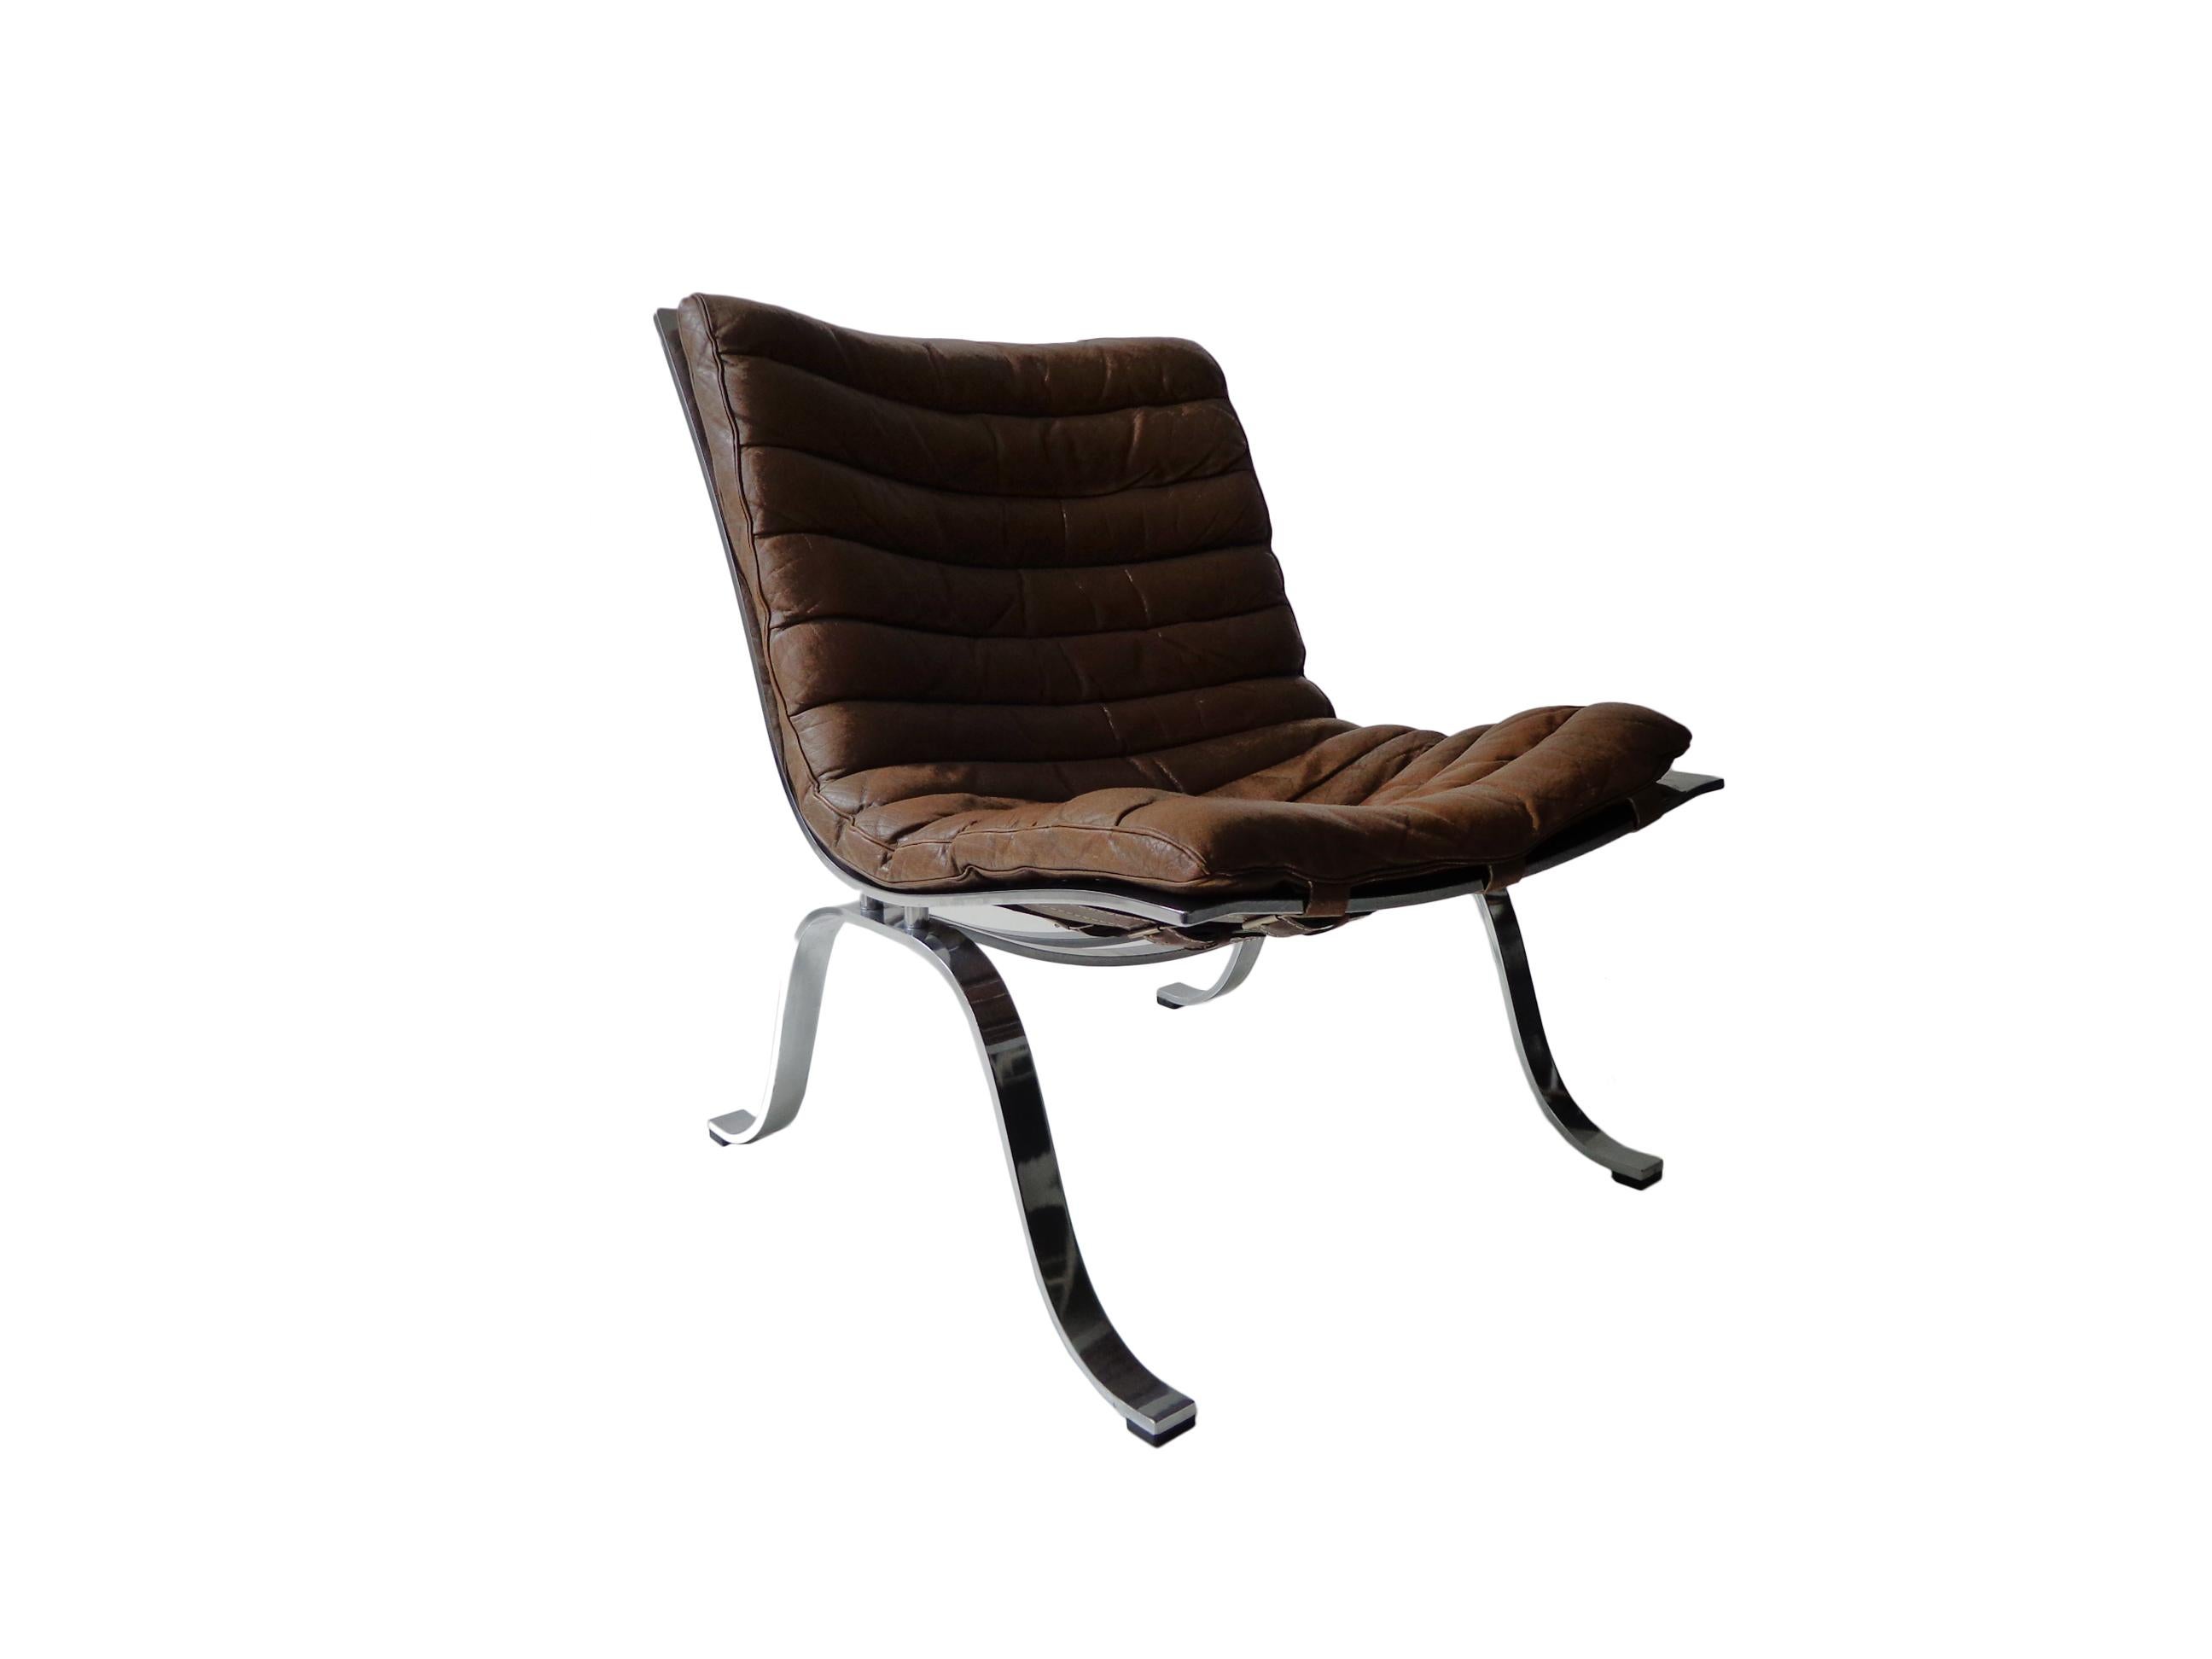 Comfortable 'Ariet' easy-lounge chair and ottoman designed by Arne Norell. This chair is made of high quality flat matt, chrome-plated steel and original cognac/brown leather. The chair is in beautiful condition with fantastic patina from age and